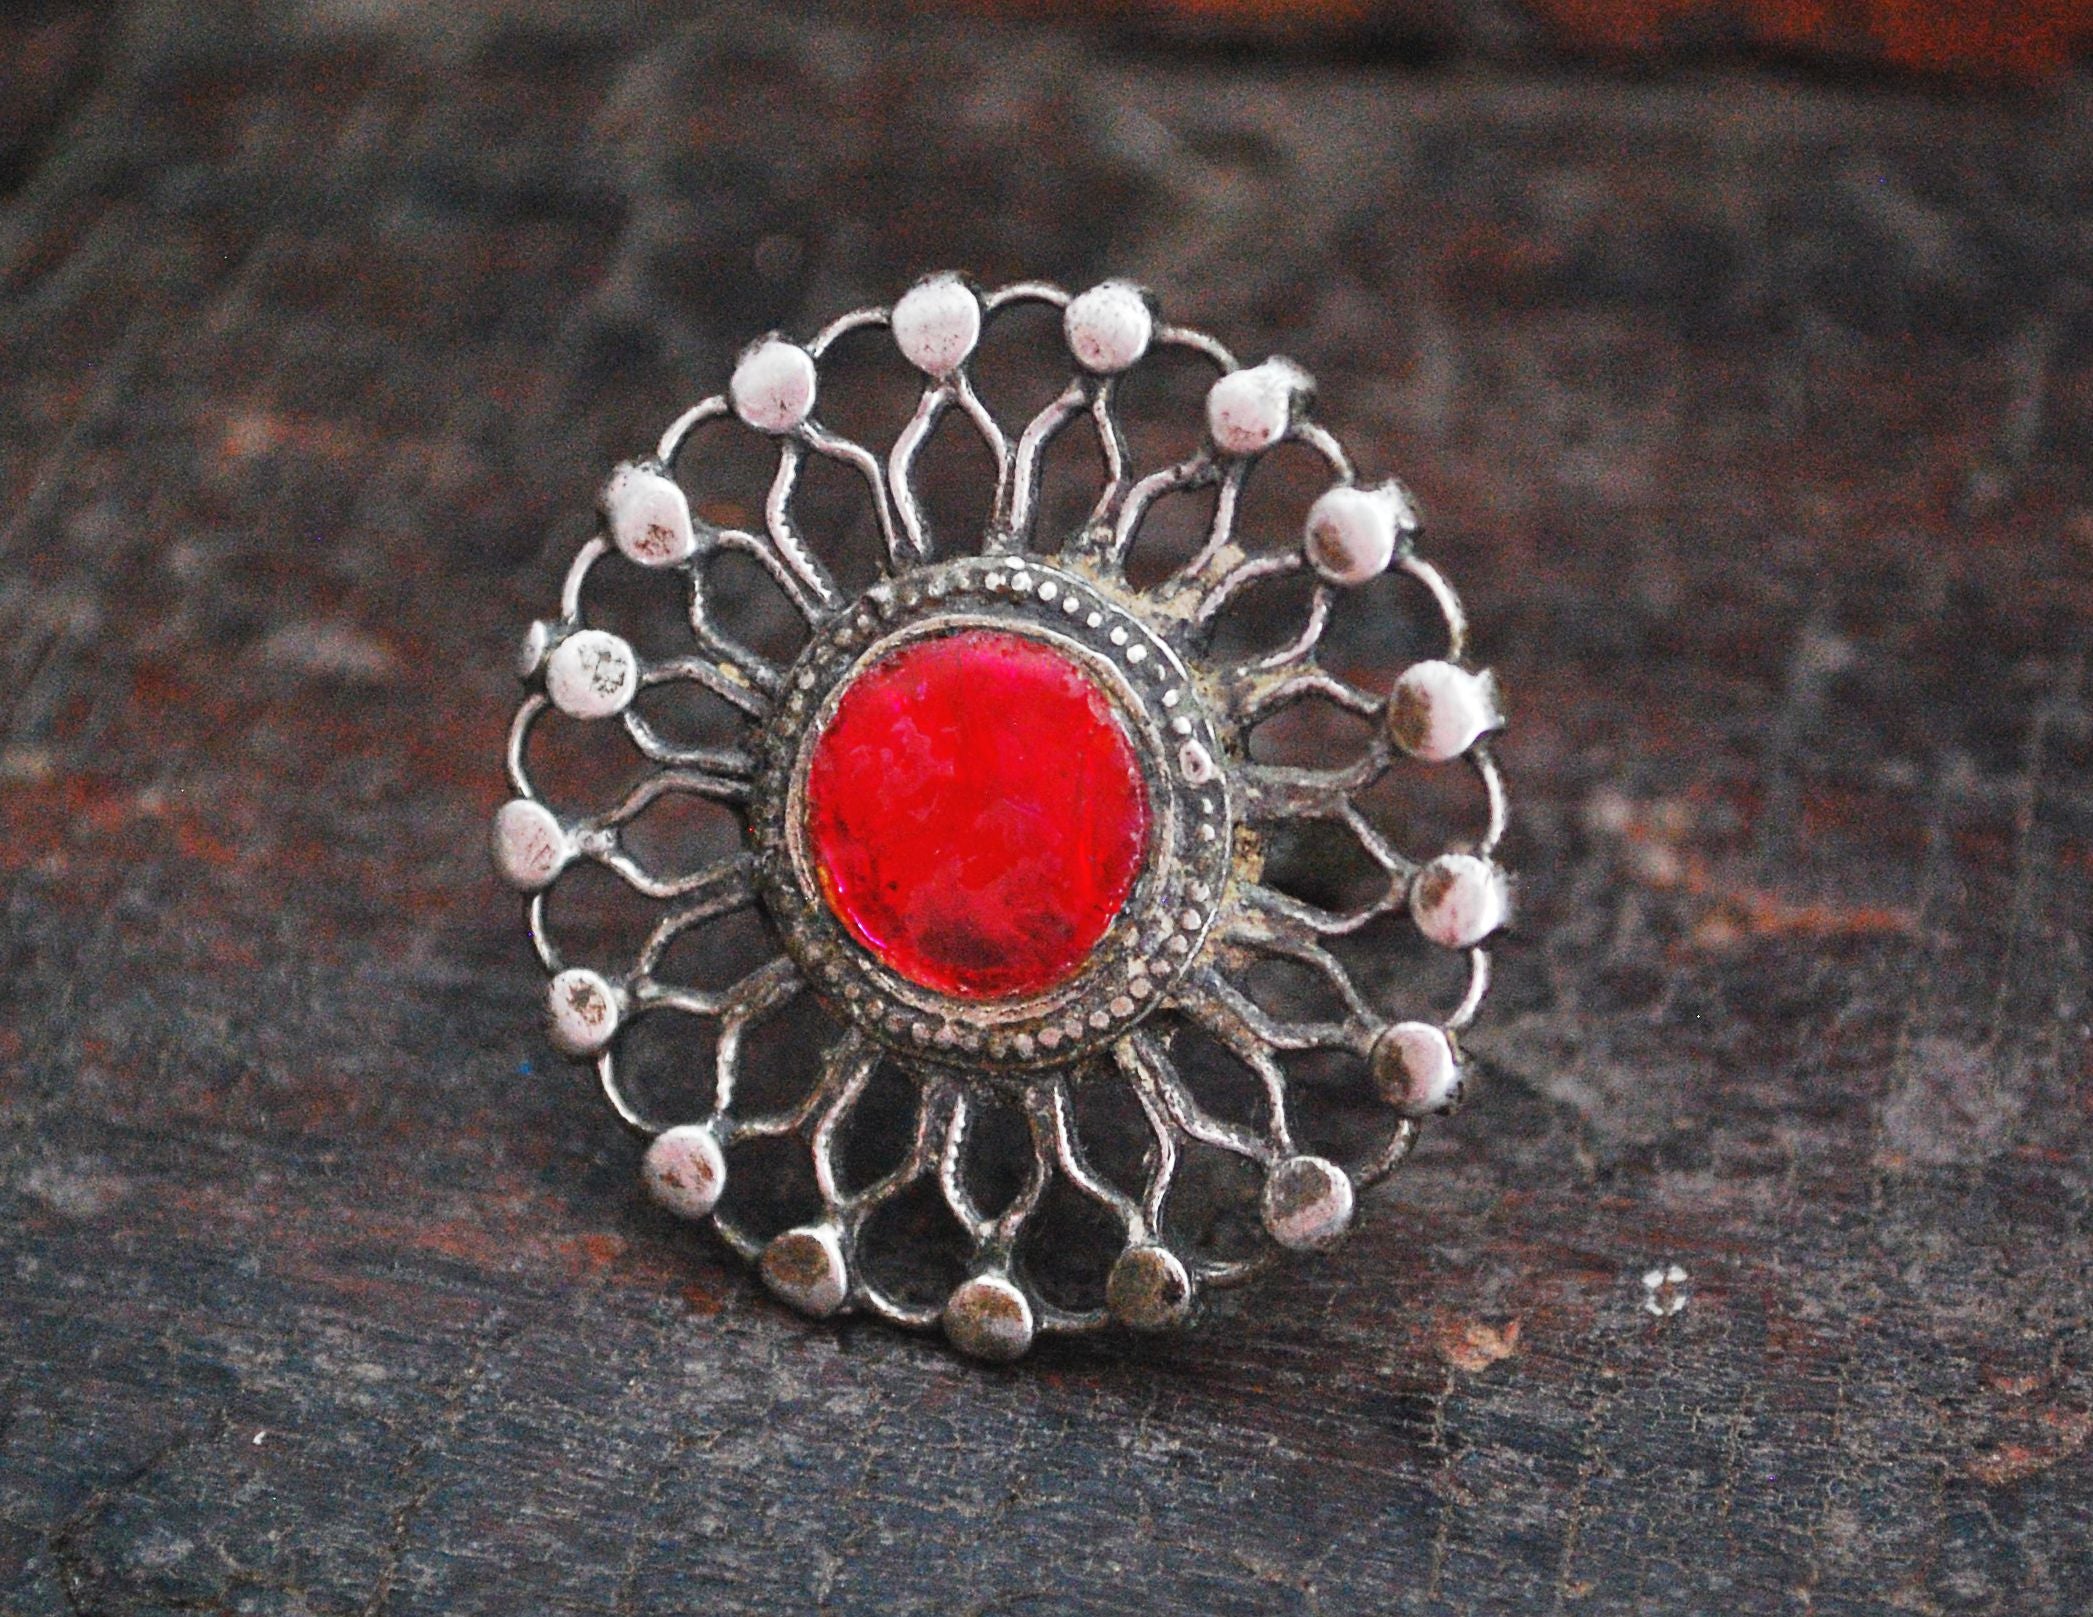 Antique Afghani Tribal Silver Ring - Size 7